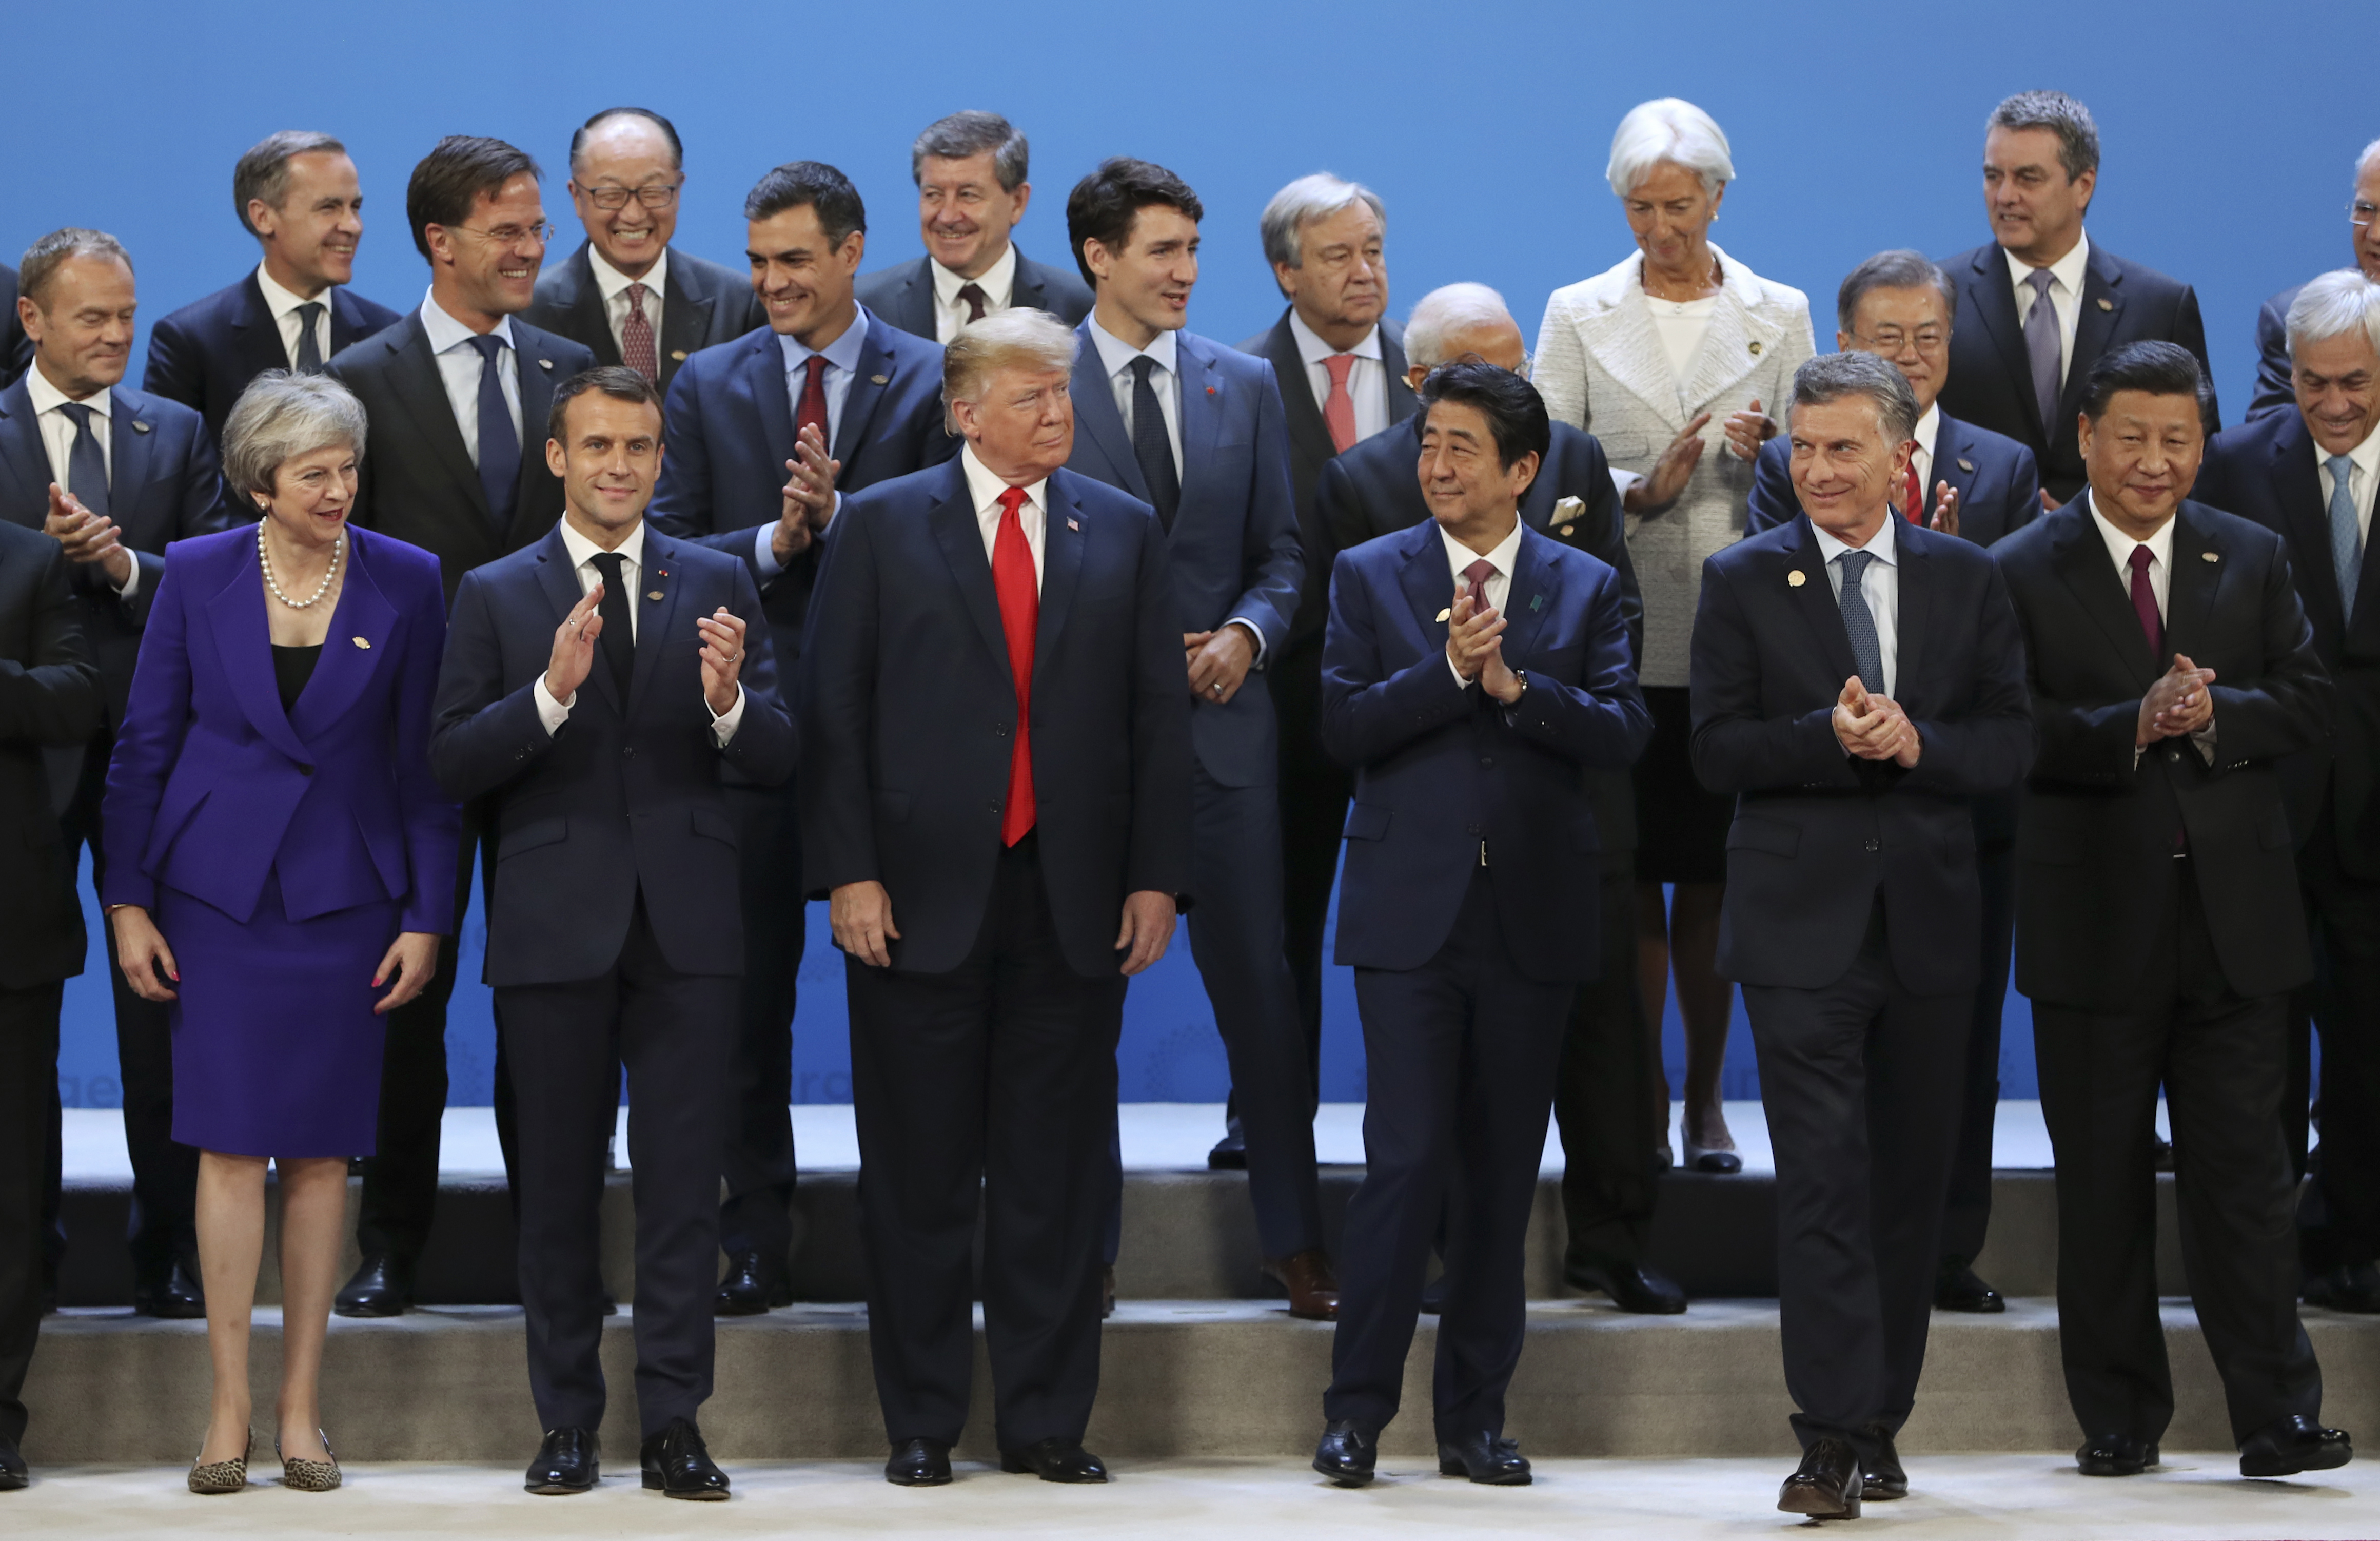 World leaders gather for a group photo at the start of the G20 summit in Buenos Aires